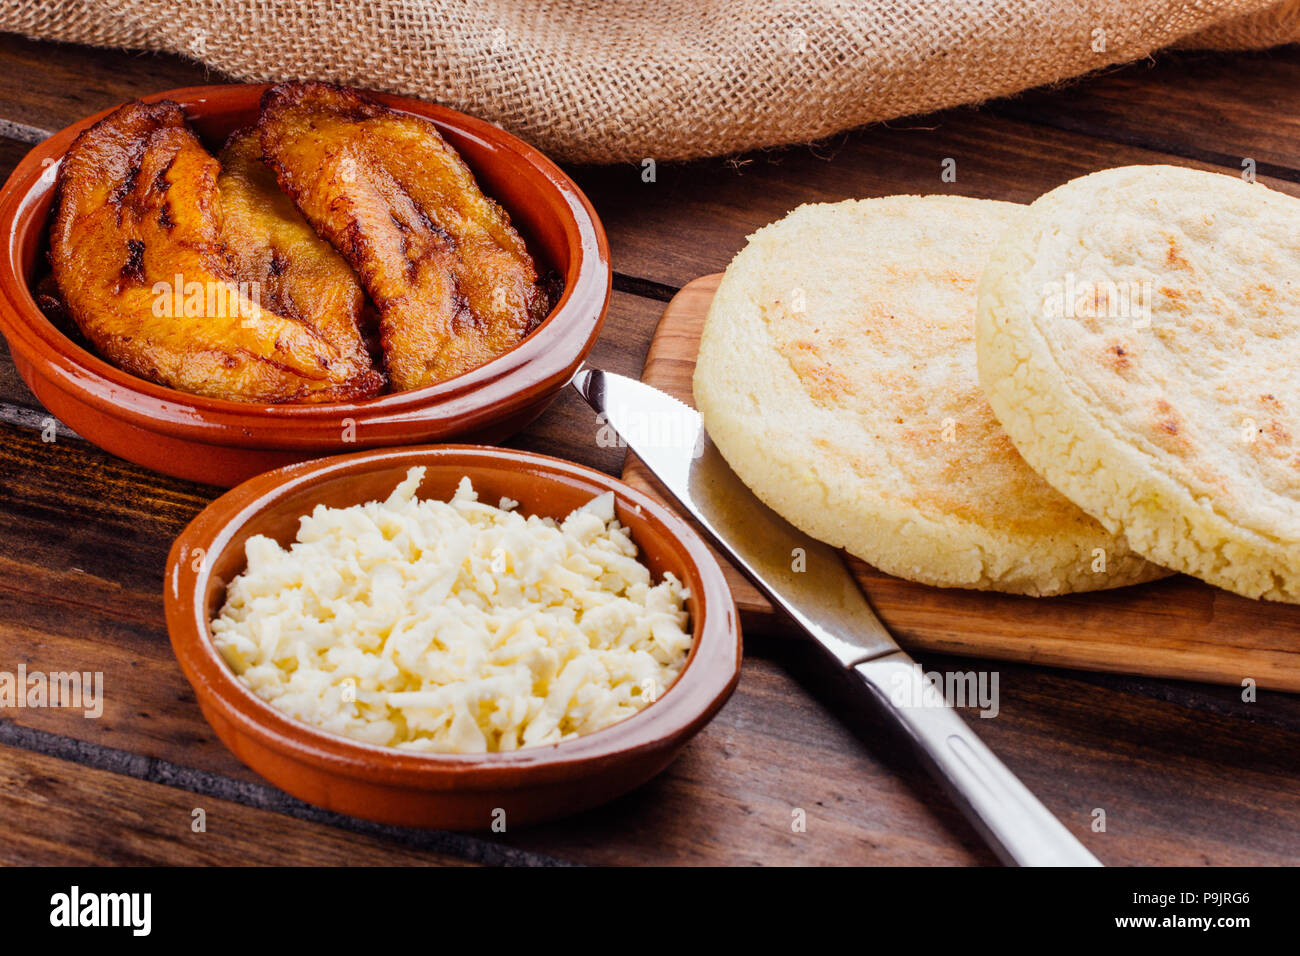 Venezuelan breakfast, Arepas on wooden board and next to it a container with cheese and another with fried plantain to fill Stock Photo